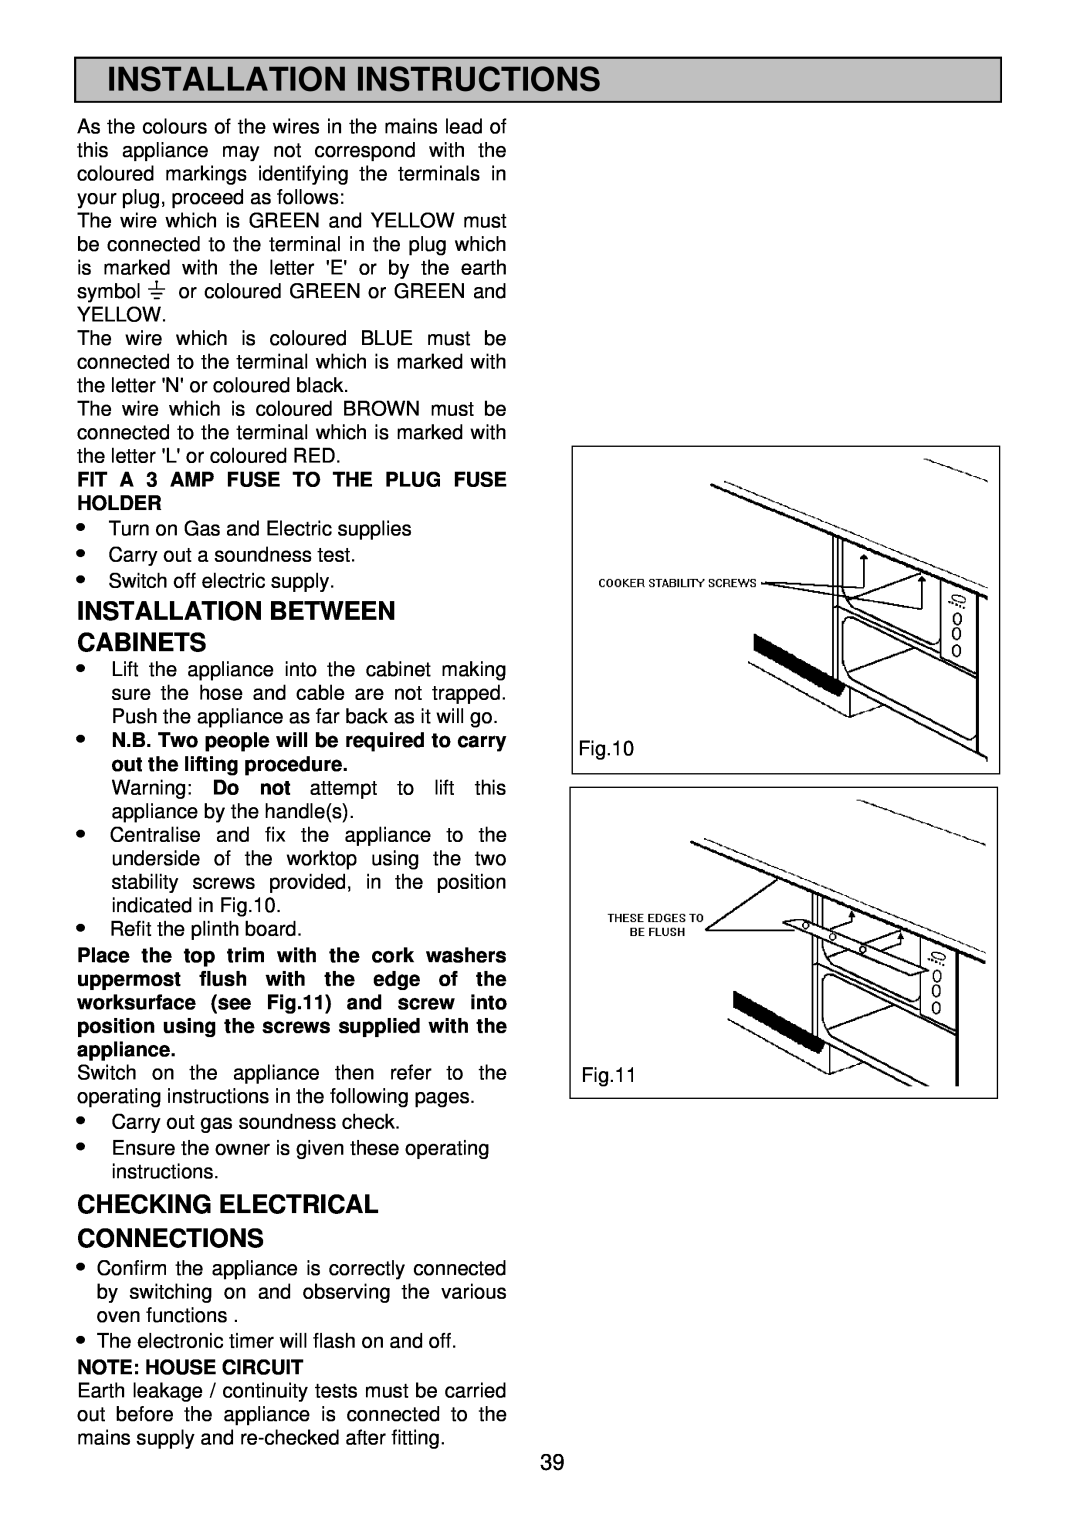 Electrolux EDB 872 manual Installation Between Cabinets, Checking Electrical Connections, Installation Instructions 